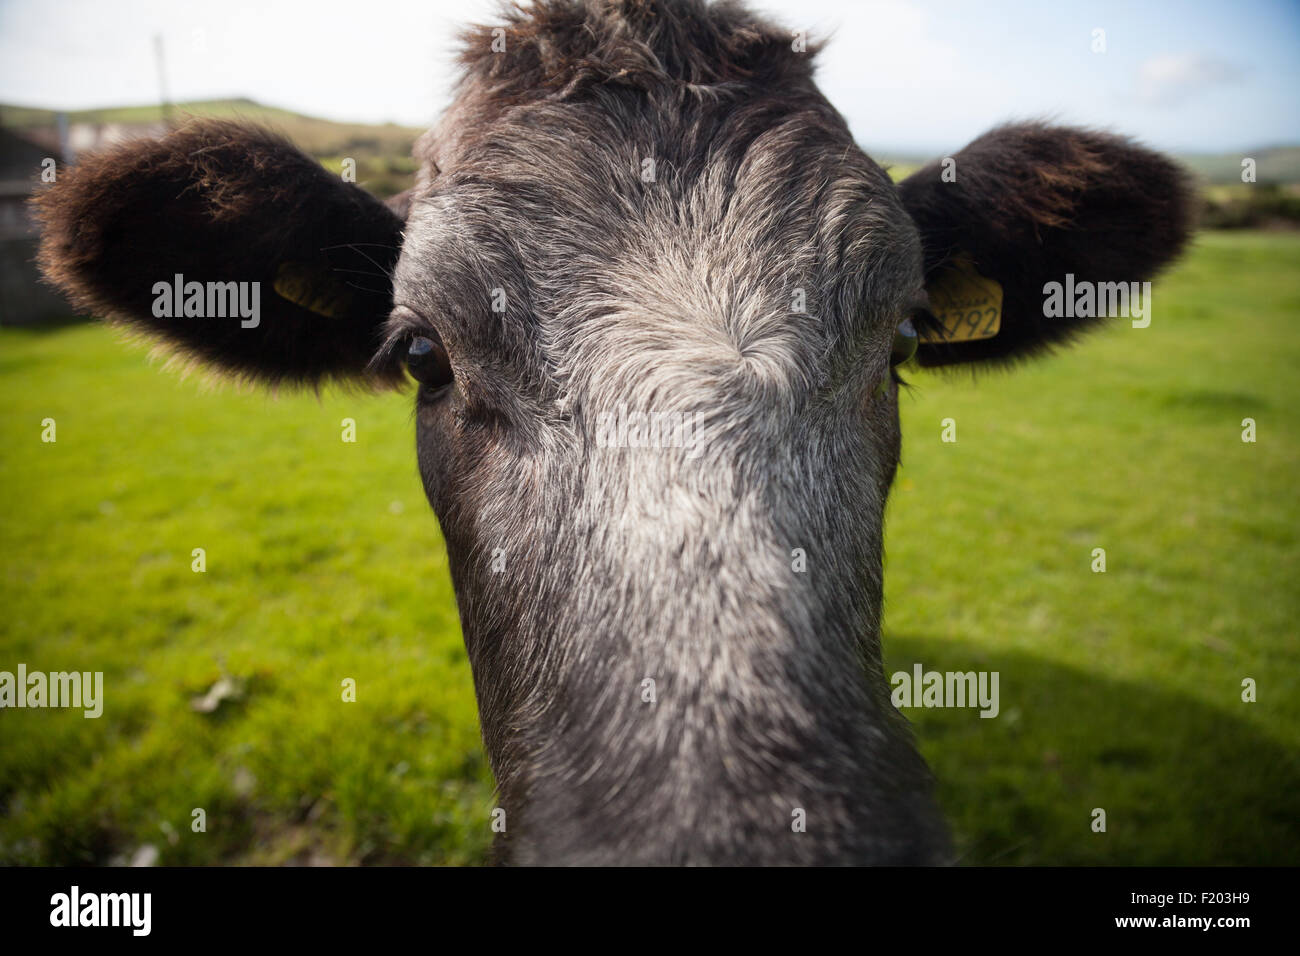 A very curious black & grey cow comes very close to camera standing in a lush green field near Aberdaron, Llyn Peninsula, Wales Stock Photo